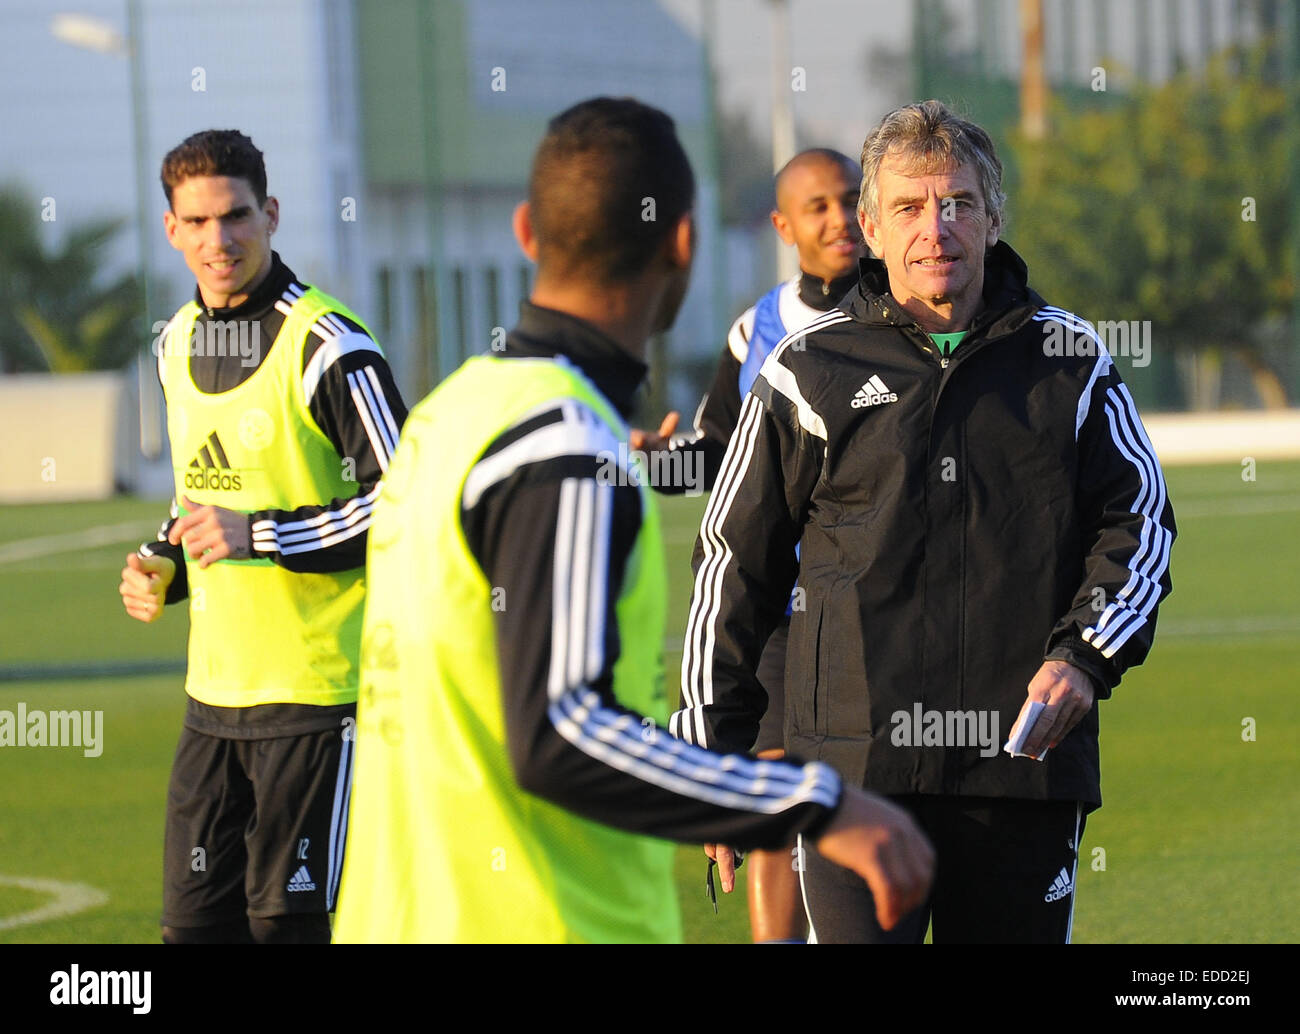 Algiers. 6th Jan, 2015. Algerian national football team head coach Christian Gourcuff (1st R) attends a training session in Algiers, capital of Algeria, Jan. 5, 2015. The 2015 Africa Cup of Nations will be held in Equatorial Guinea from Jan. 17 to Feb. 8. © Xinhua/Alamy Live News Stock Photo